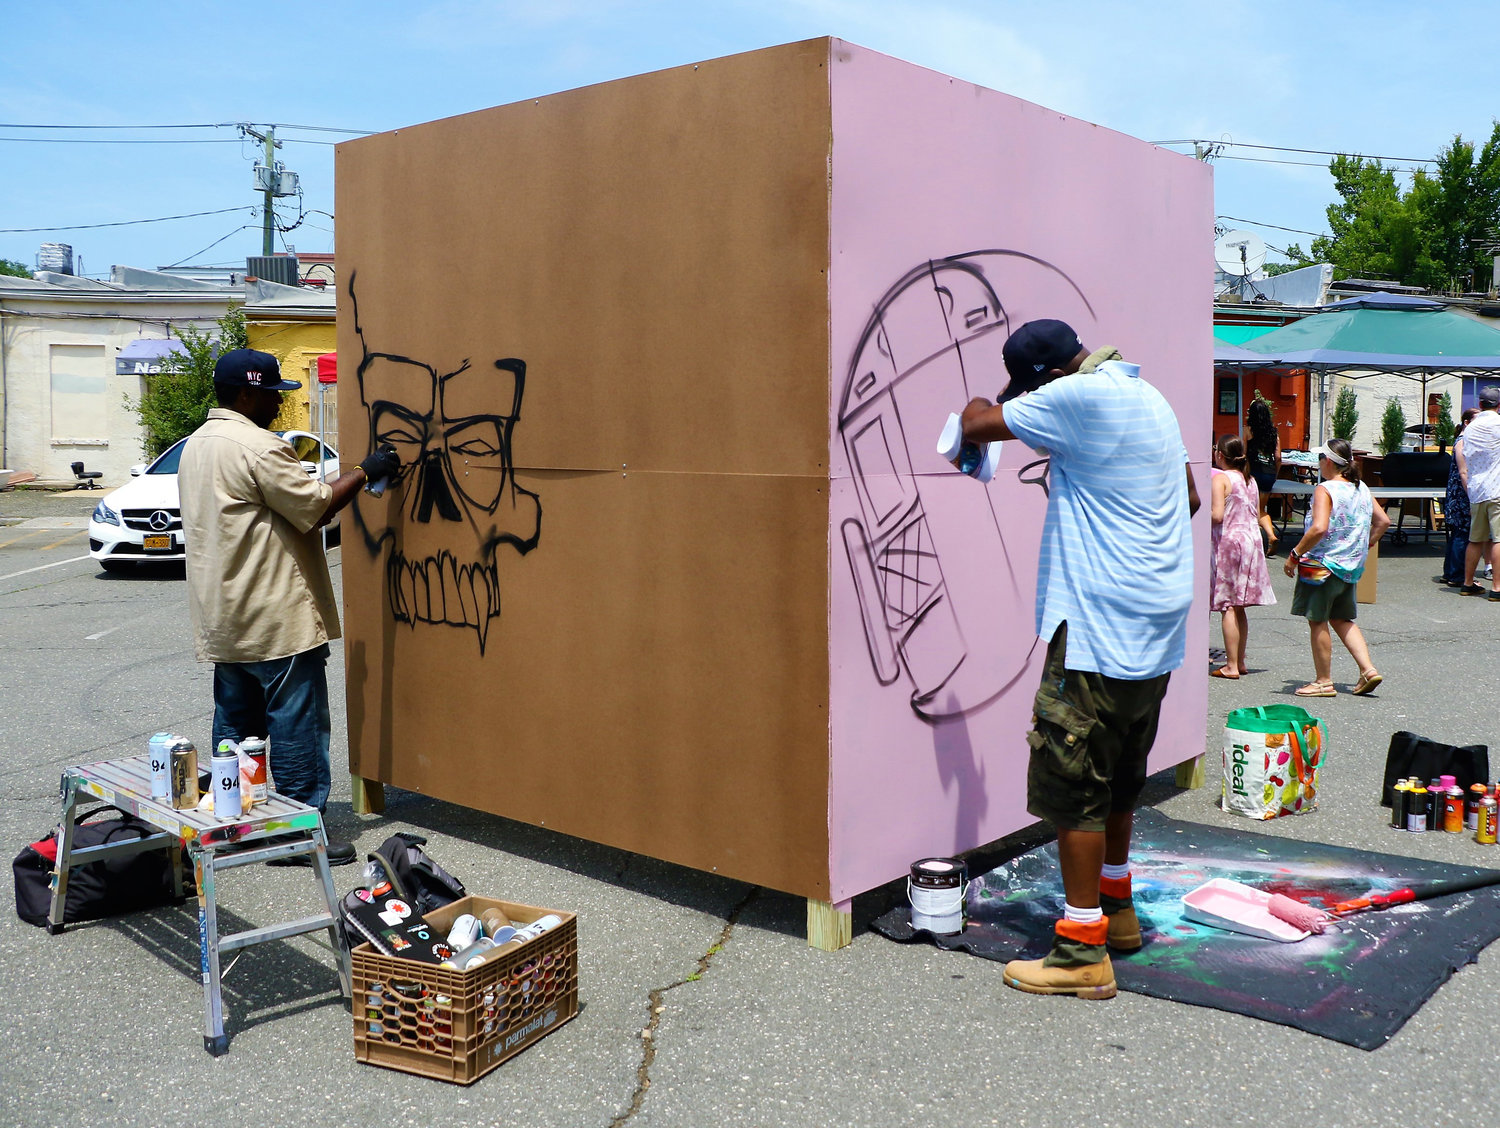 James Enuf Rufffin started painting his creation of a skull and Lou Defour started painting his artwork of a train during the live mural painting event.